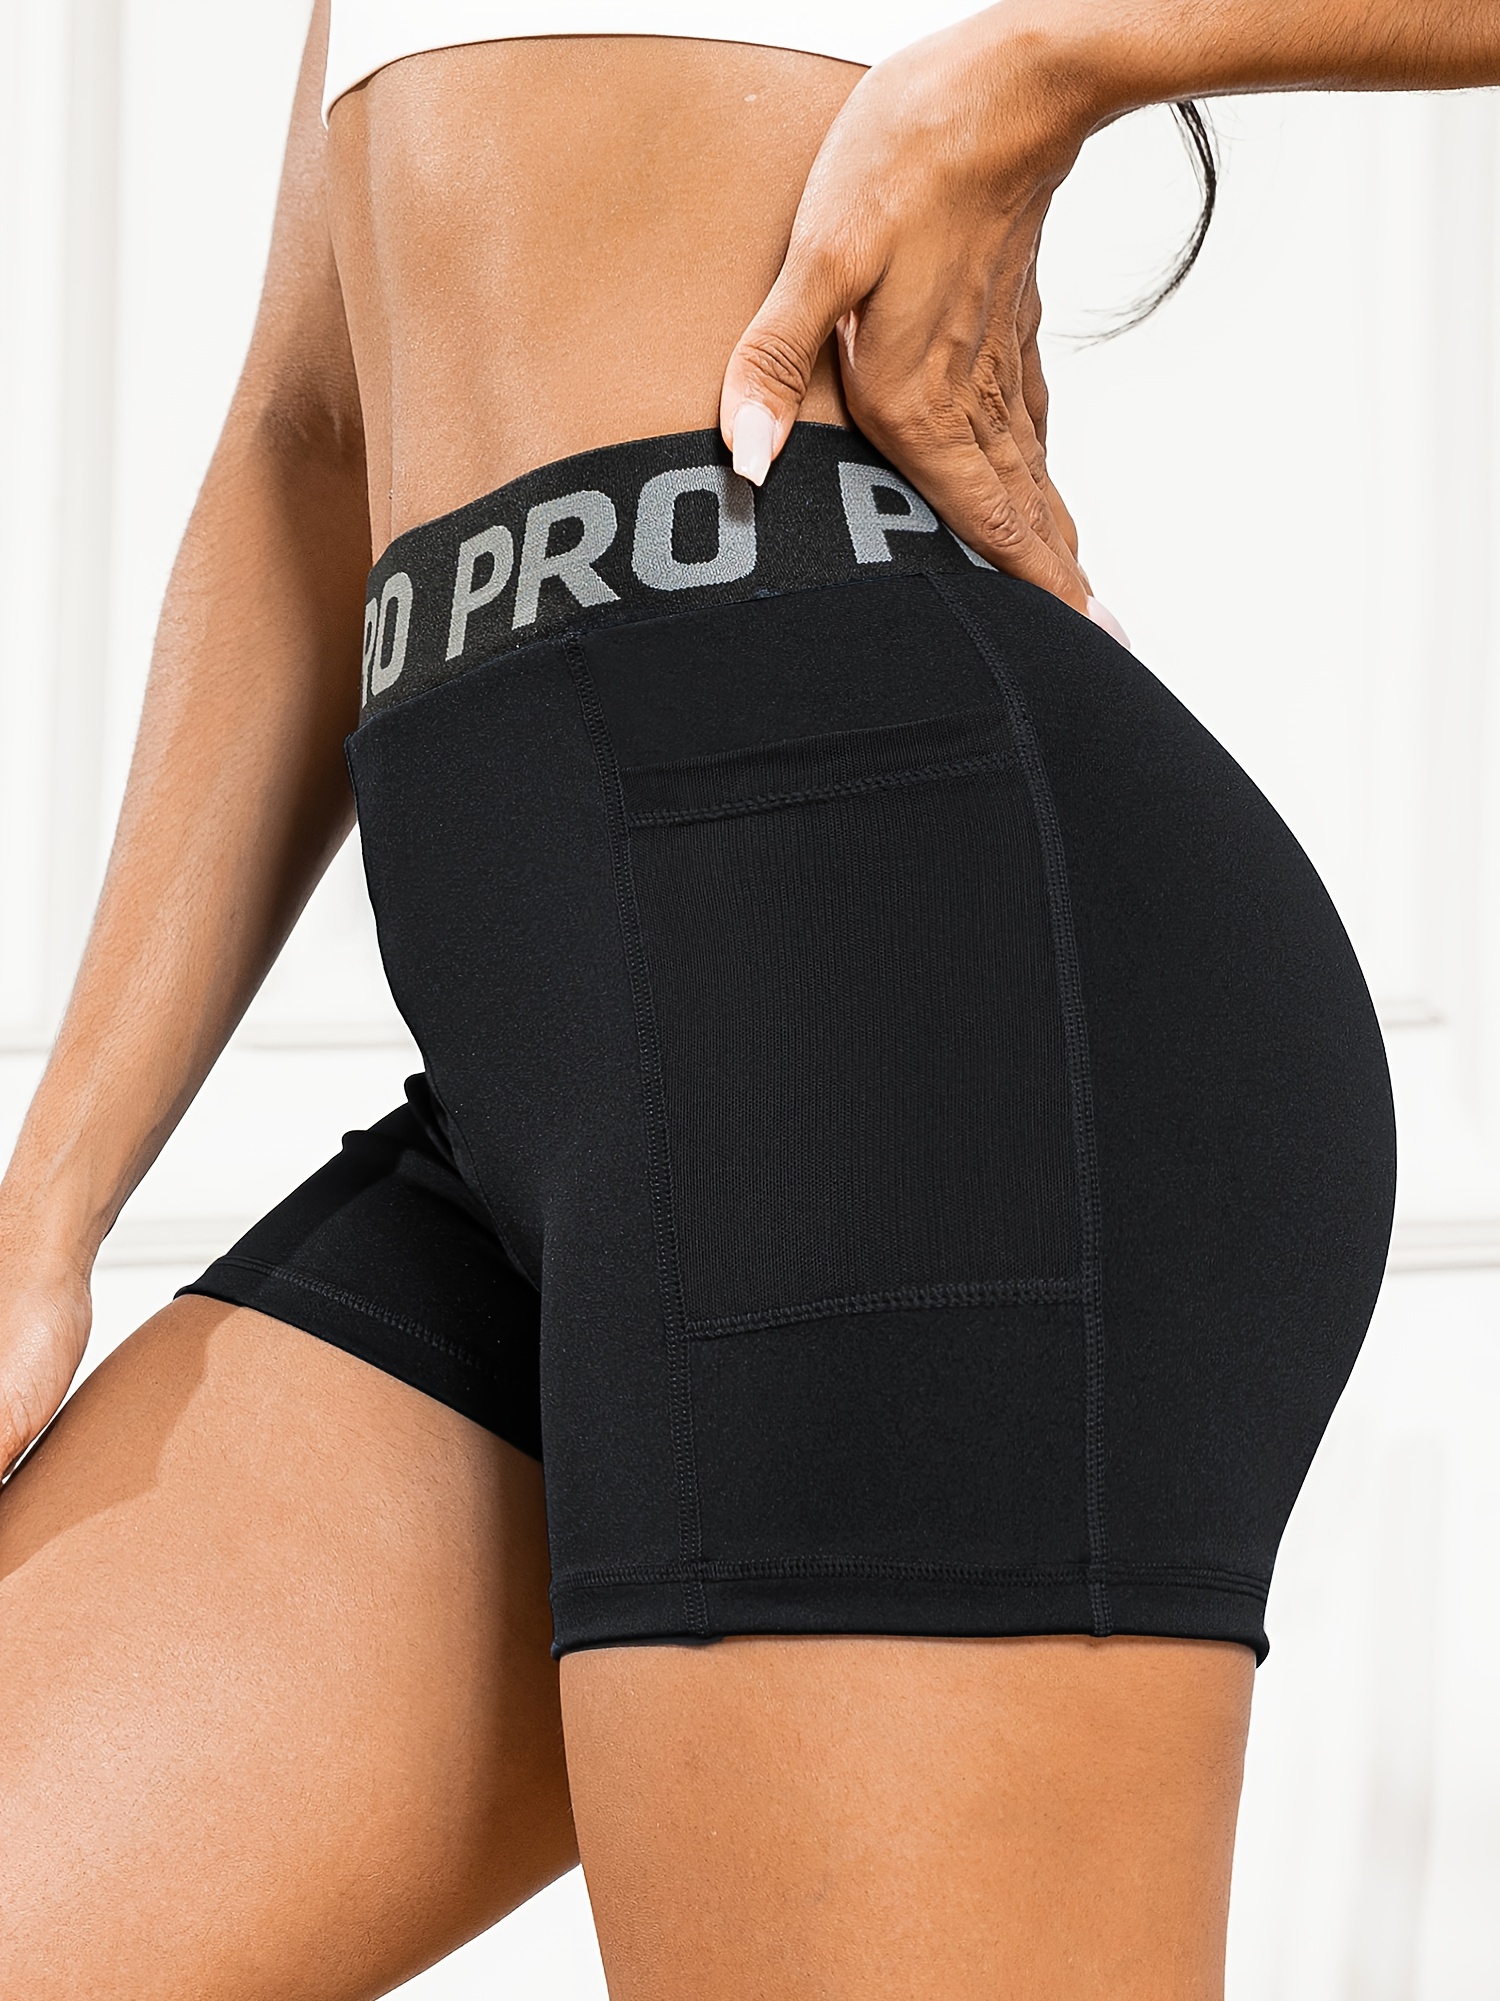 Letter Pattern High Waist Yoga Shorts With Pocket, High Stretch Butt Lifting Sports Running Workout Shorts, Women's Activewear